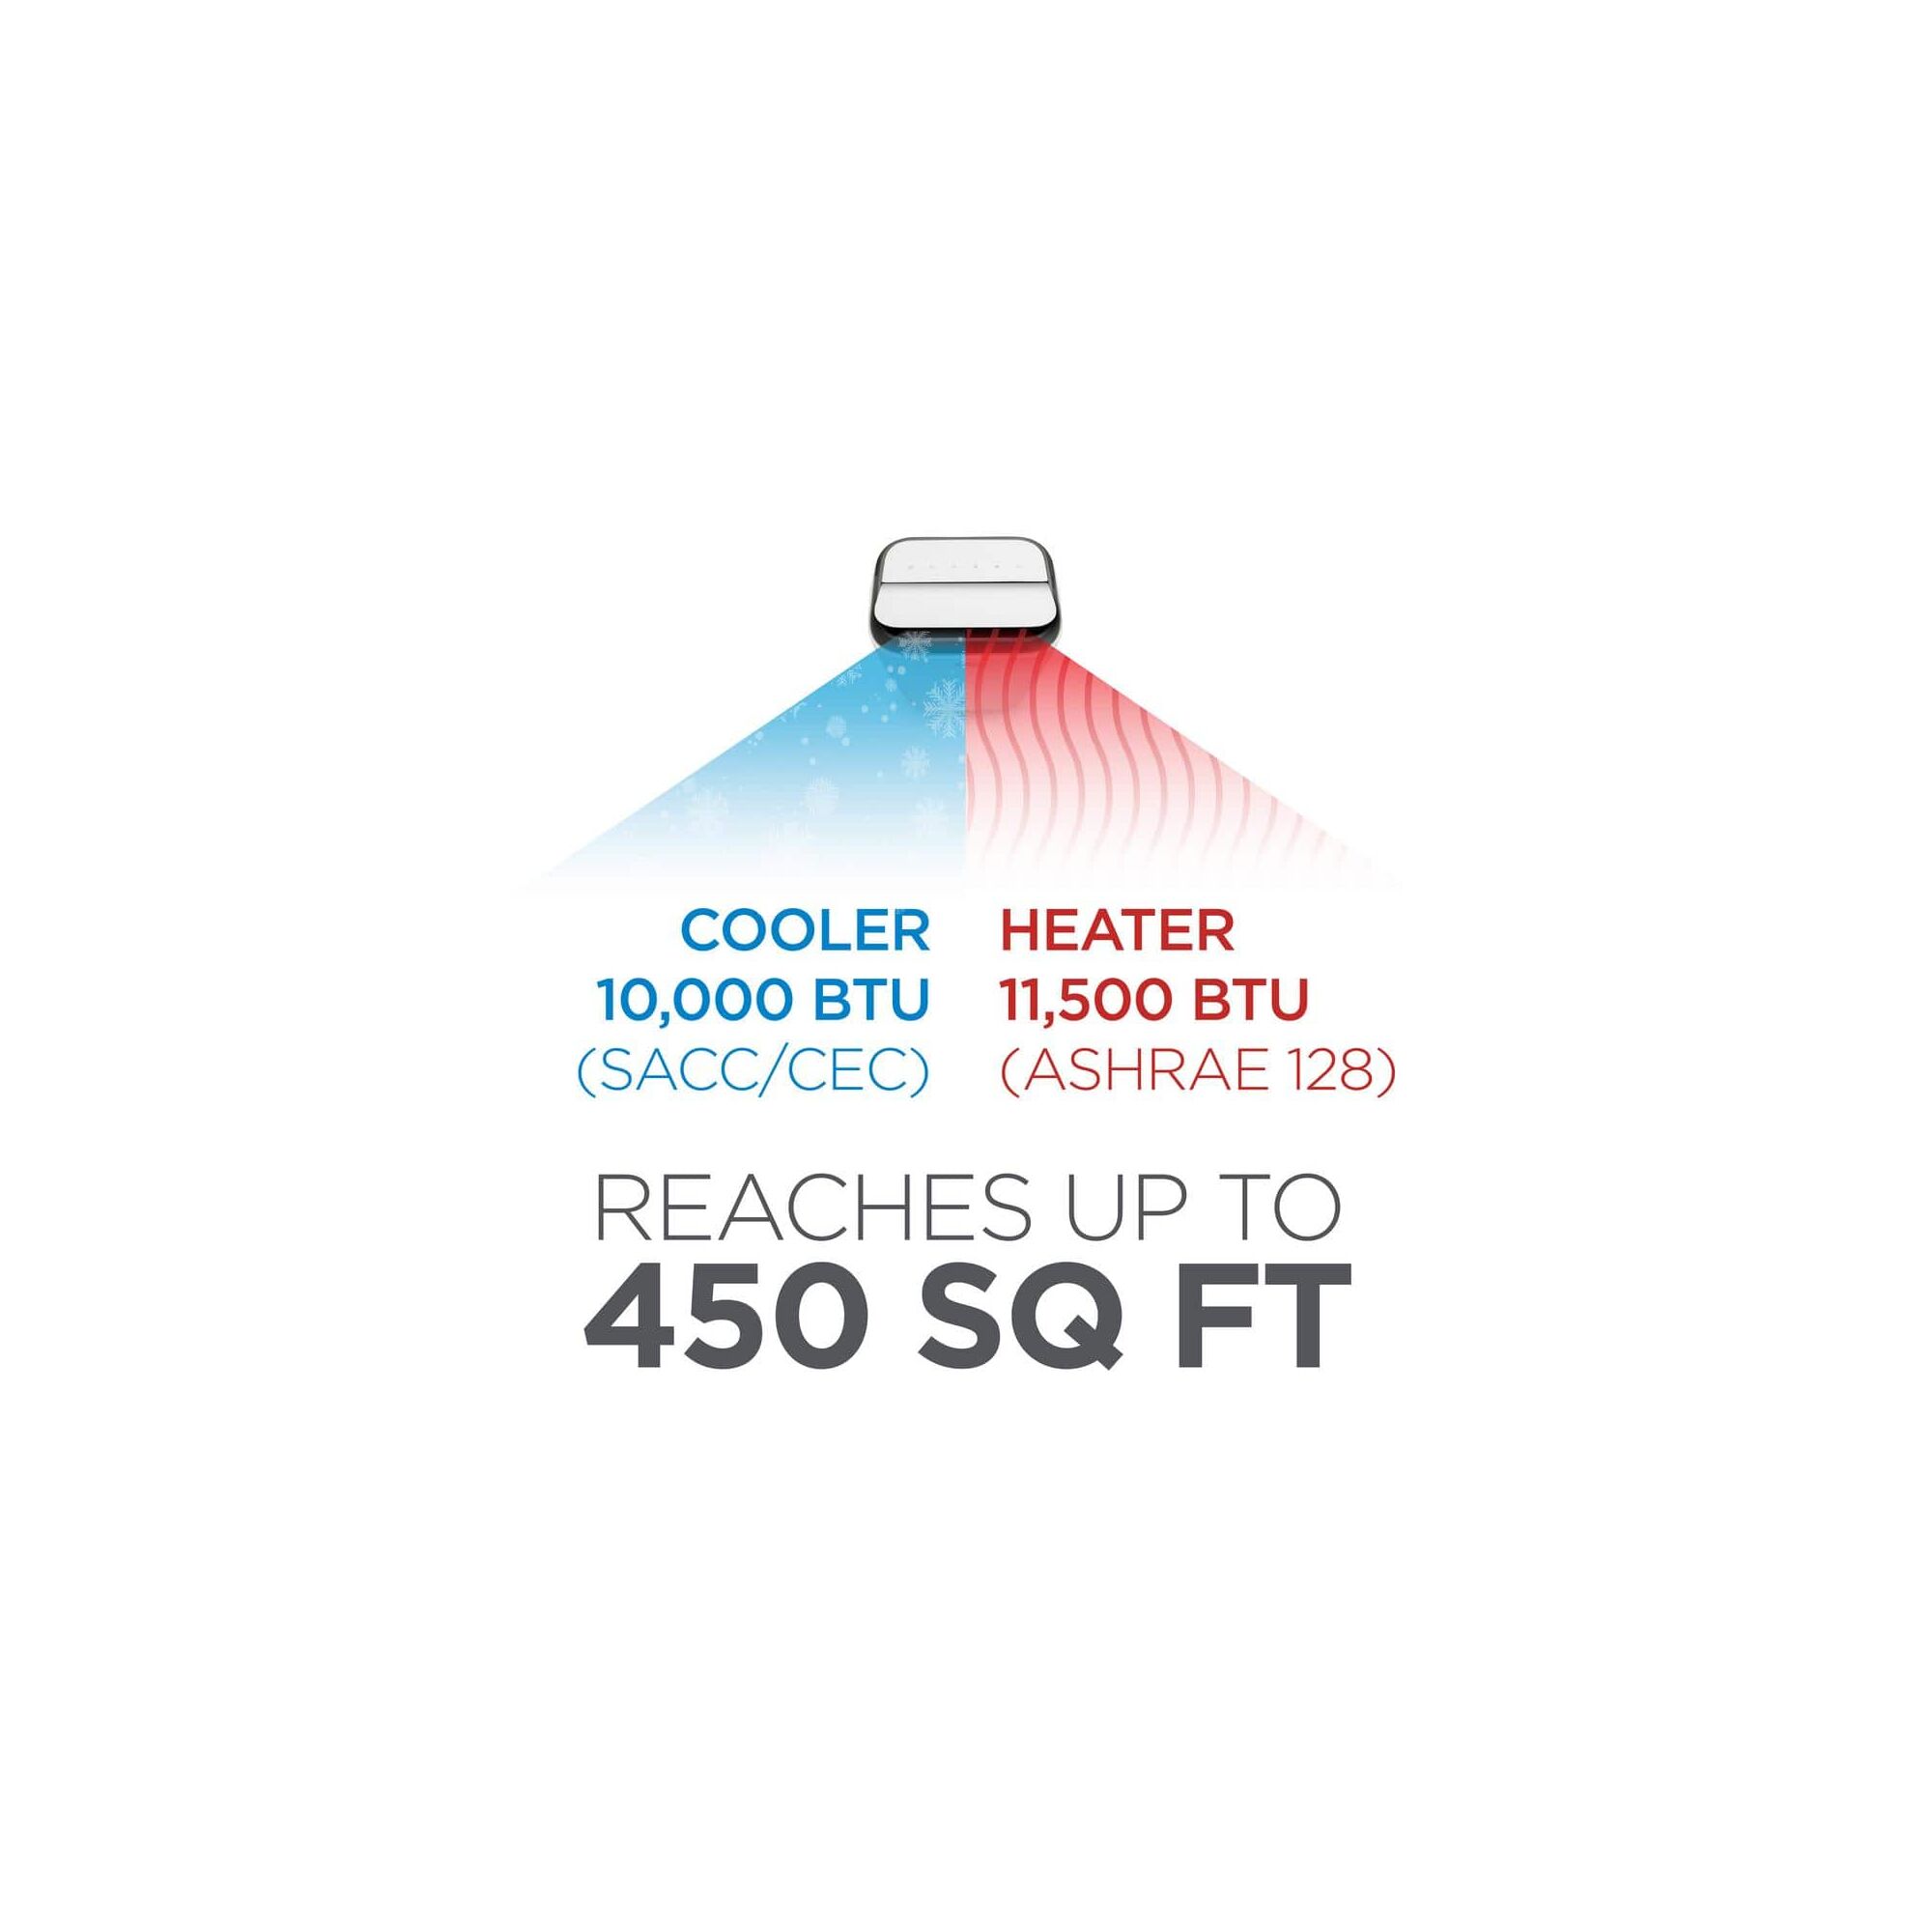 Graphic showing the heating and cooling capacity of the BLACK+DECKER portable air conditioner